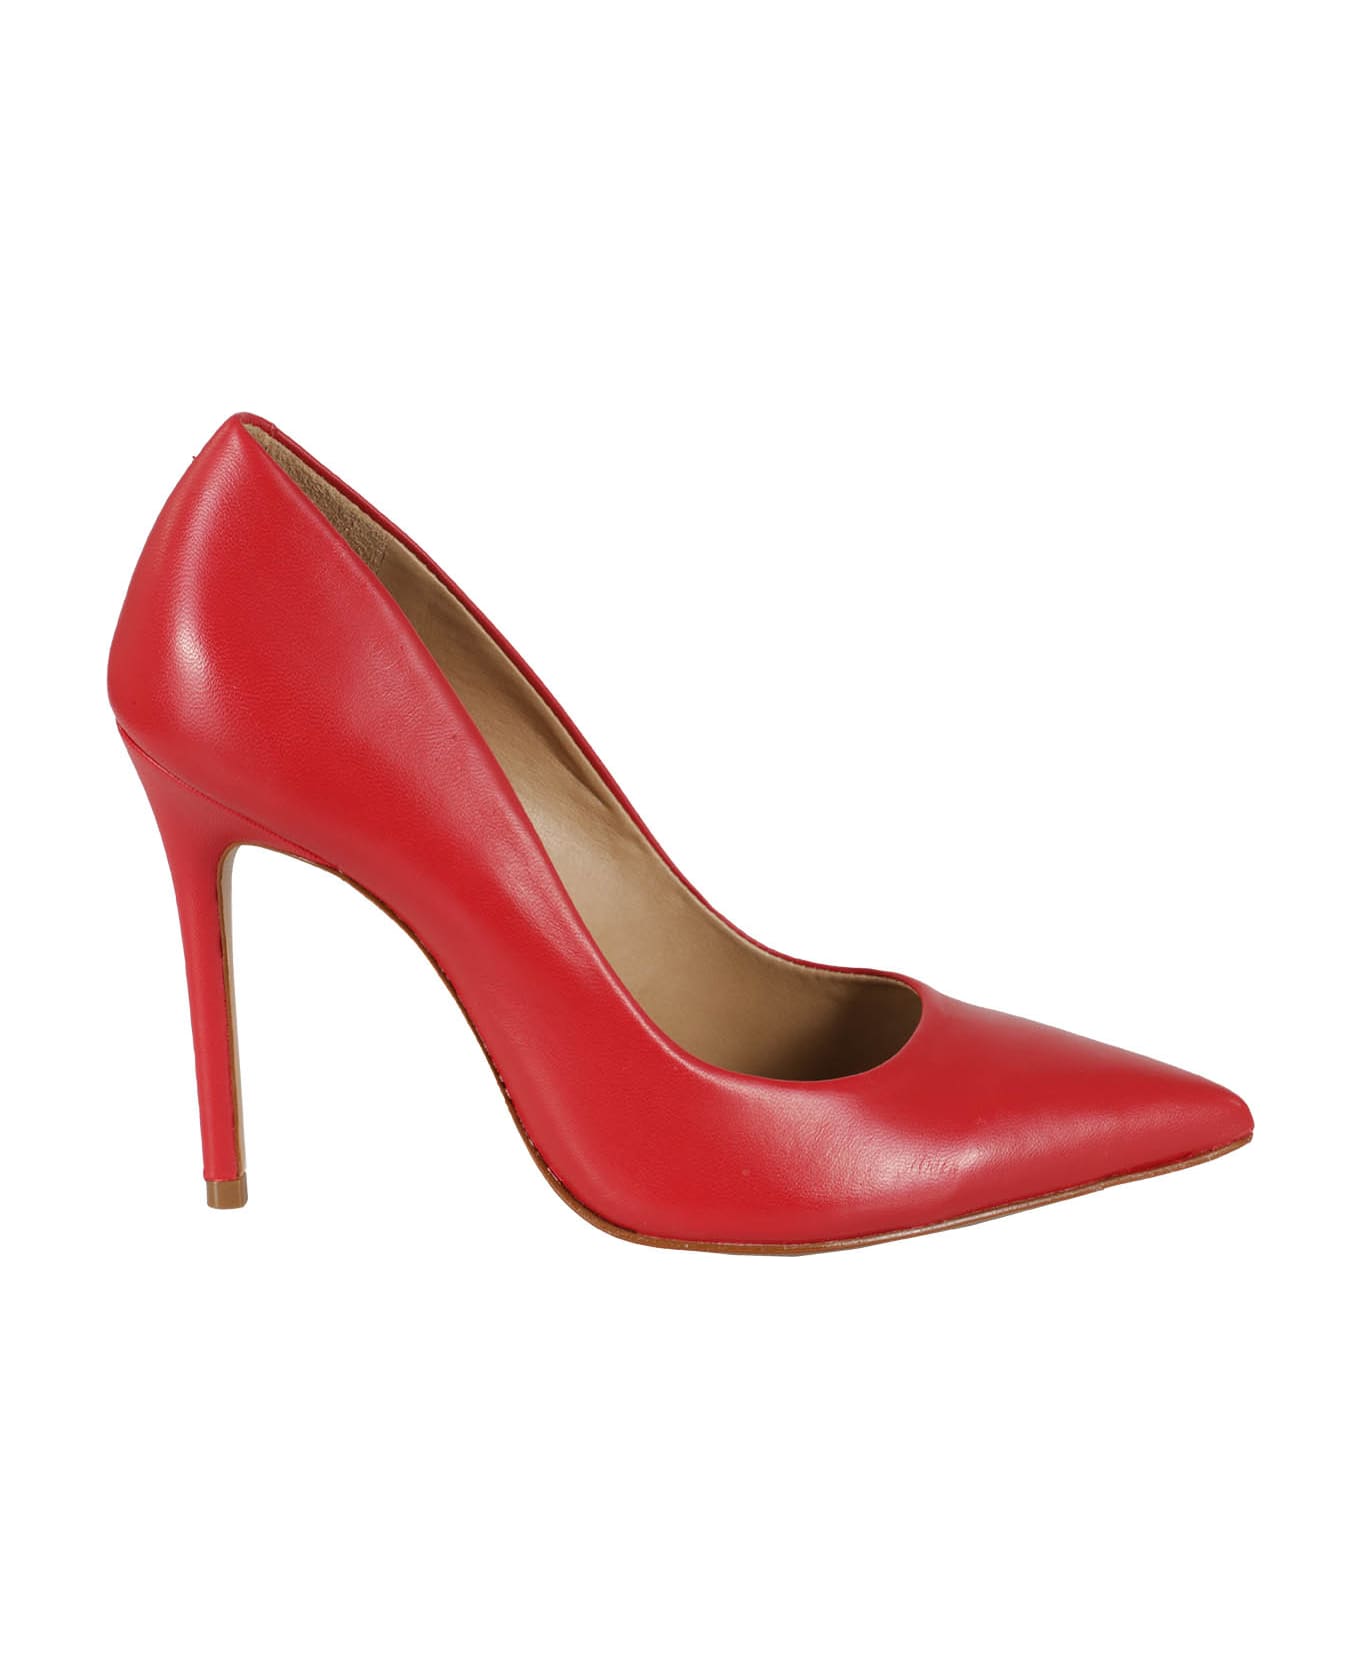 Schutz Shoes - Red ハイヒール